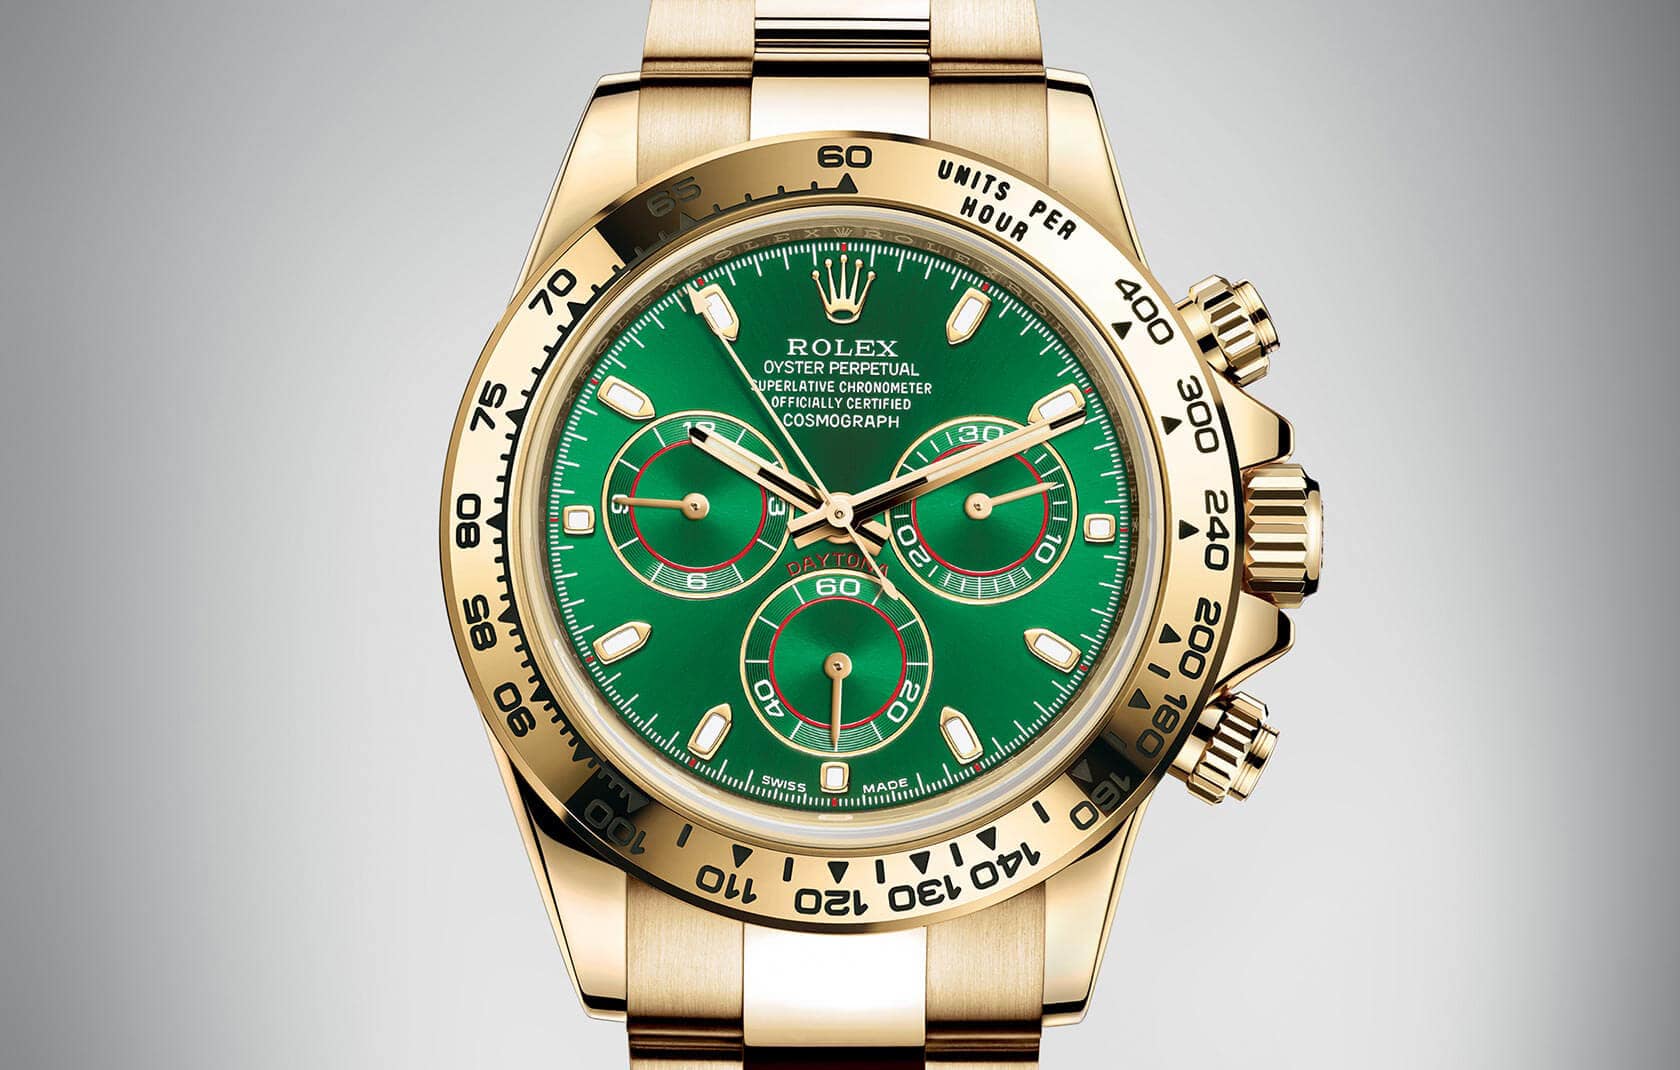 The 18ct gold fake watches have green dials.